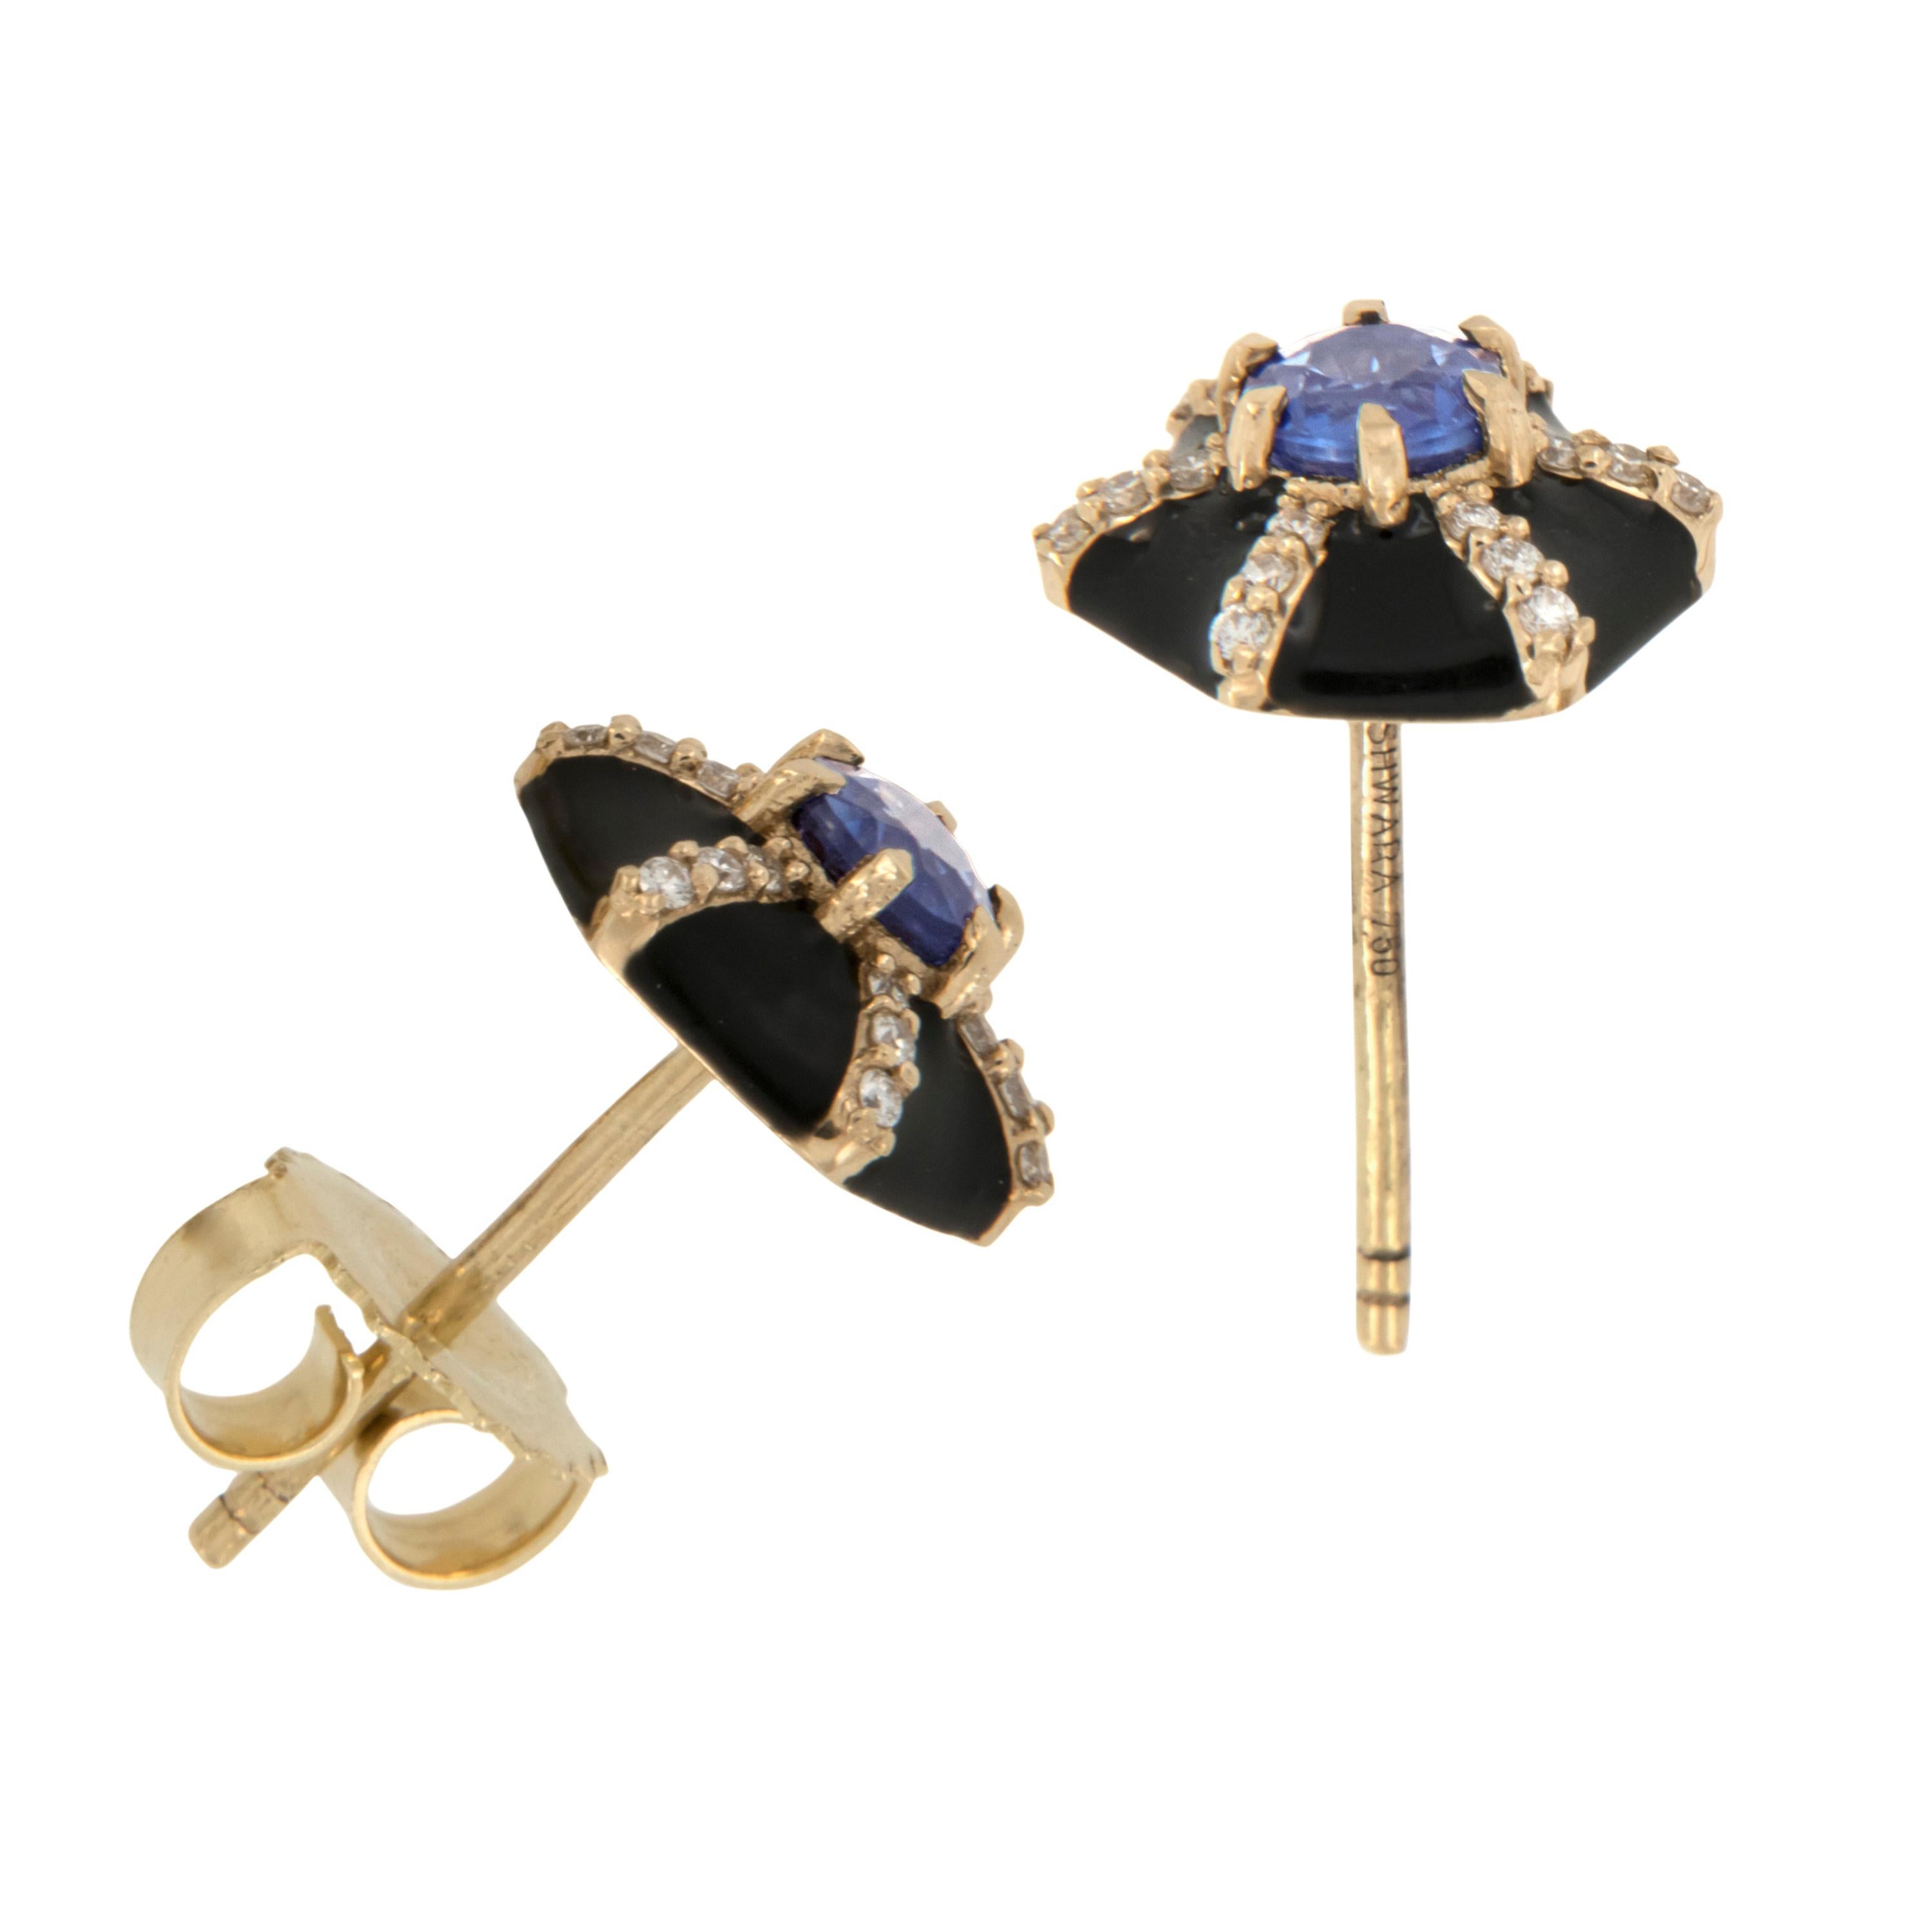 The Queen Collection was inspired by royalty, but with a modern twist. The combination of enamel, diamonds & sapphire represents power, richness and passion of a true Queen. Made in royal 18k yellow gold these fetching hexagon stud earrings with